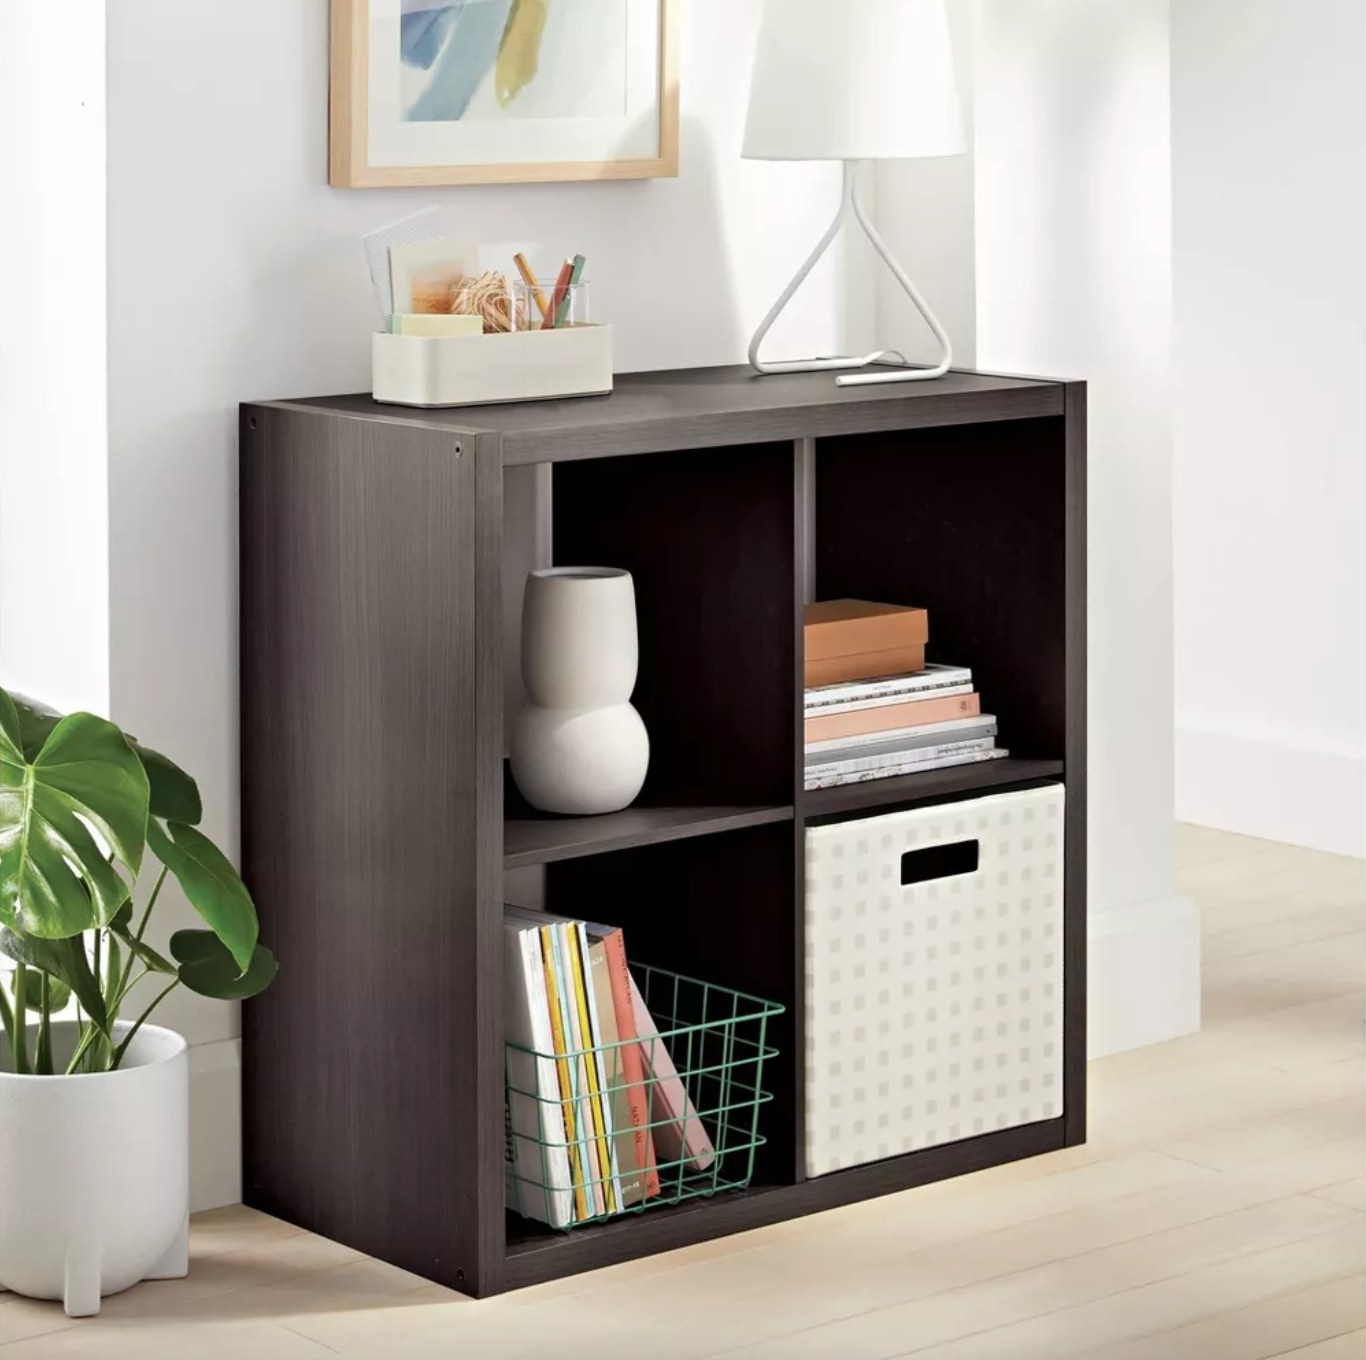 the dark wood four cube organizer in a decorated living space